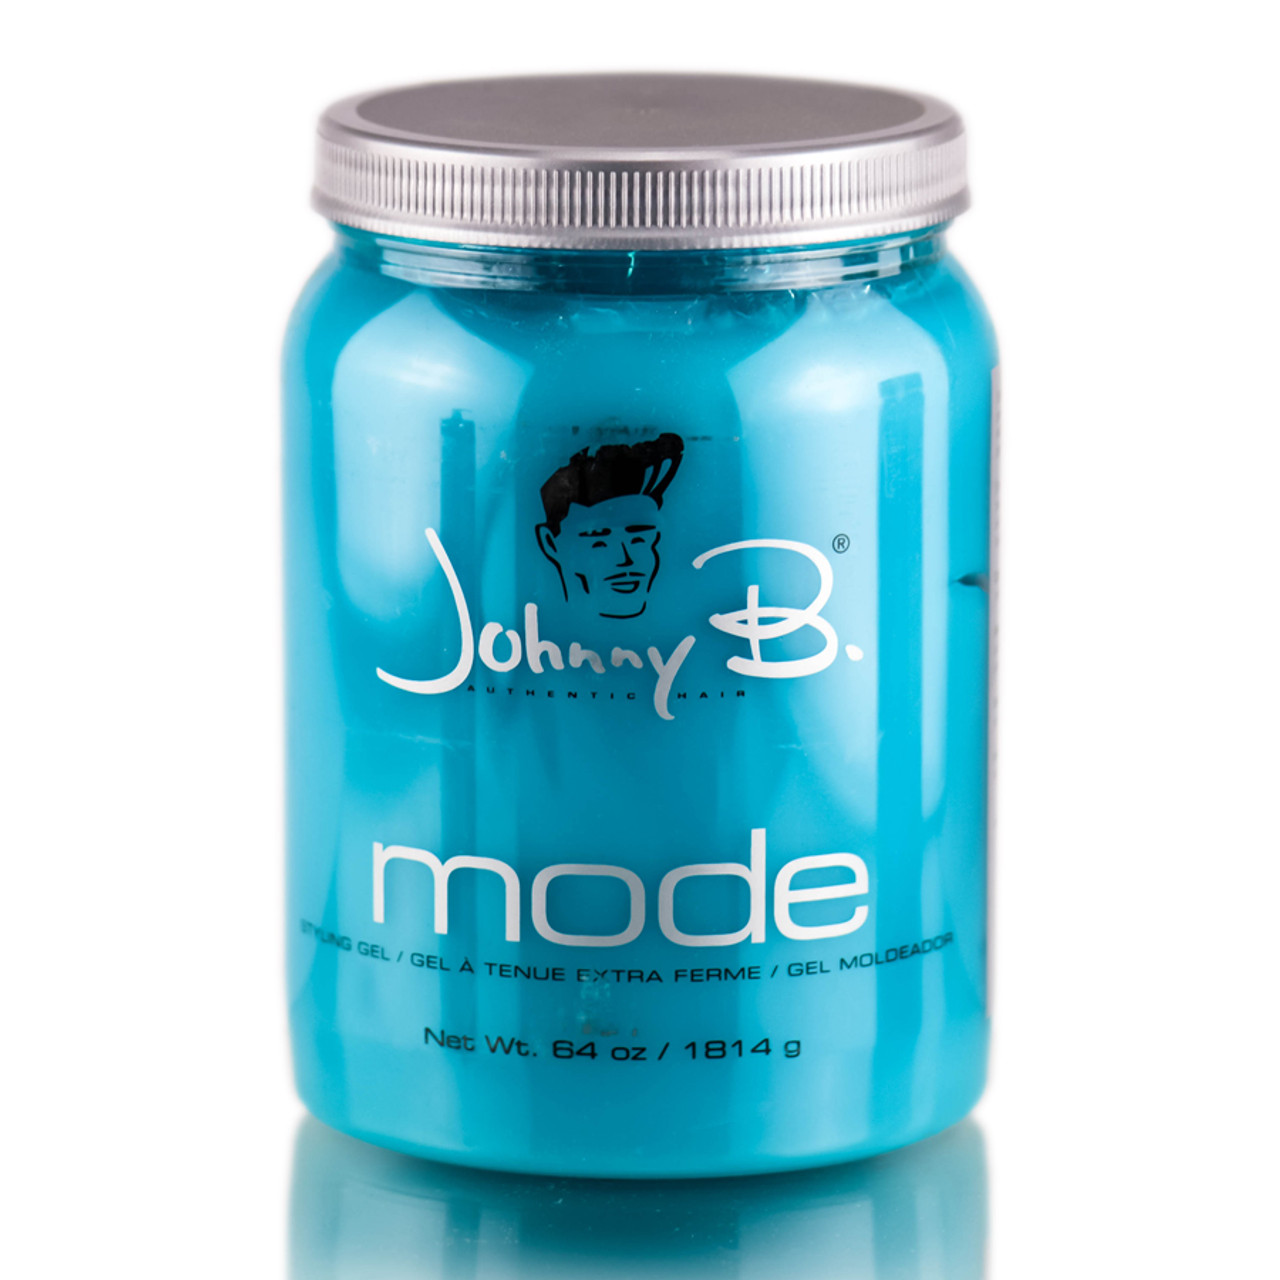 Johnny B Mode Styling Gel 6.7 Oz Brand New Packaging – Cuts On Time